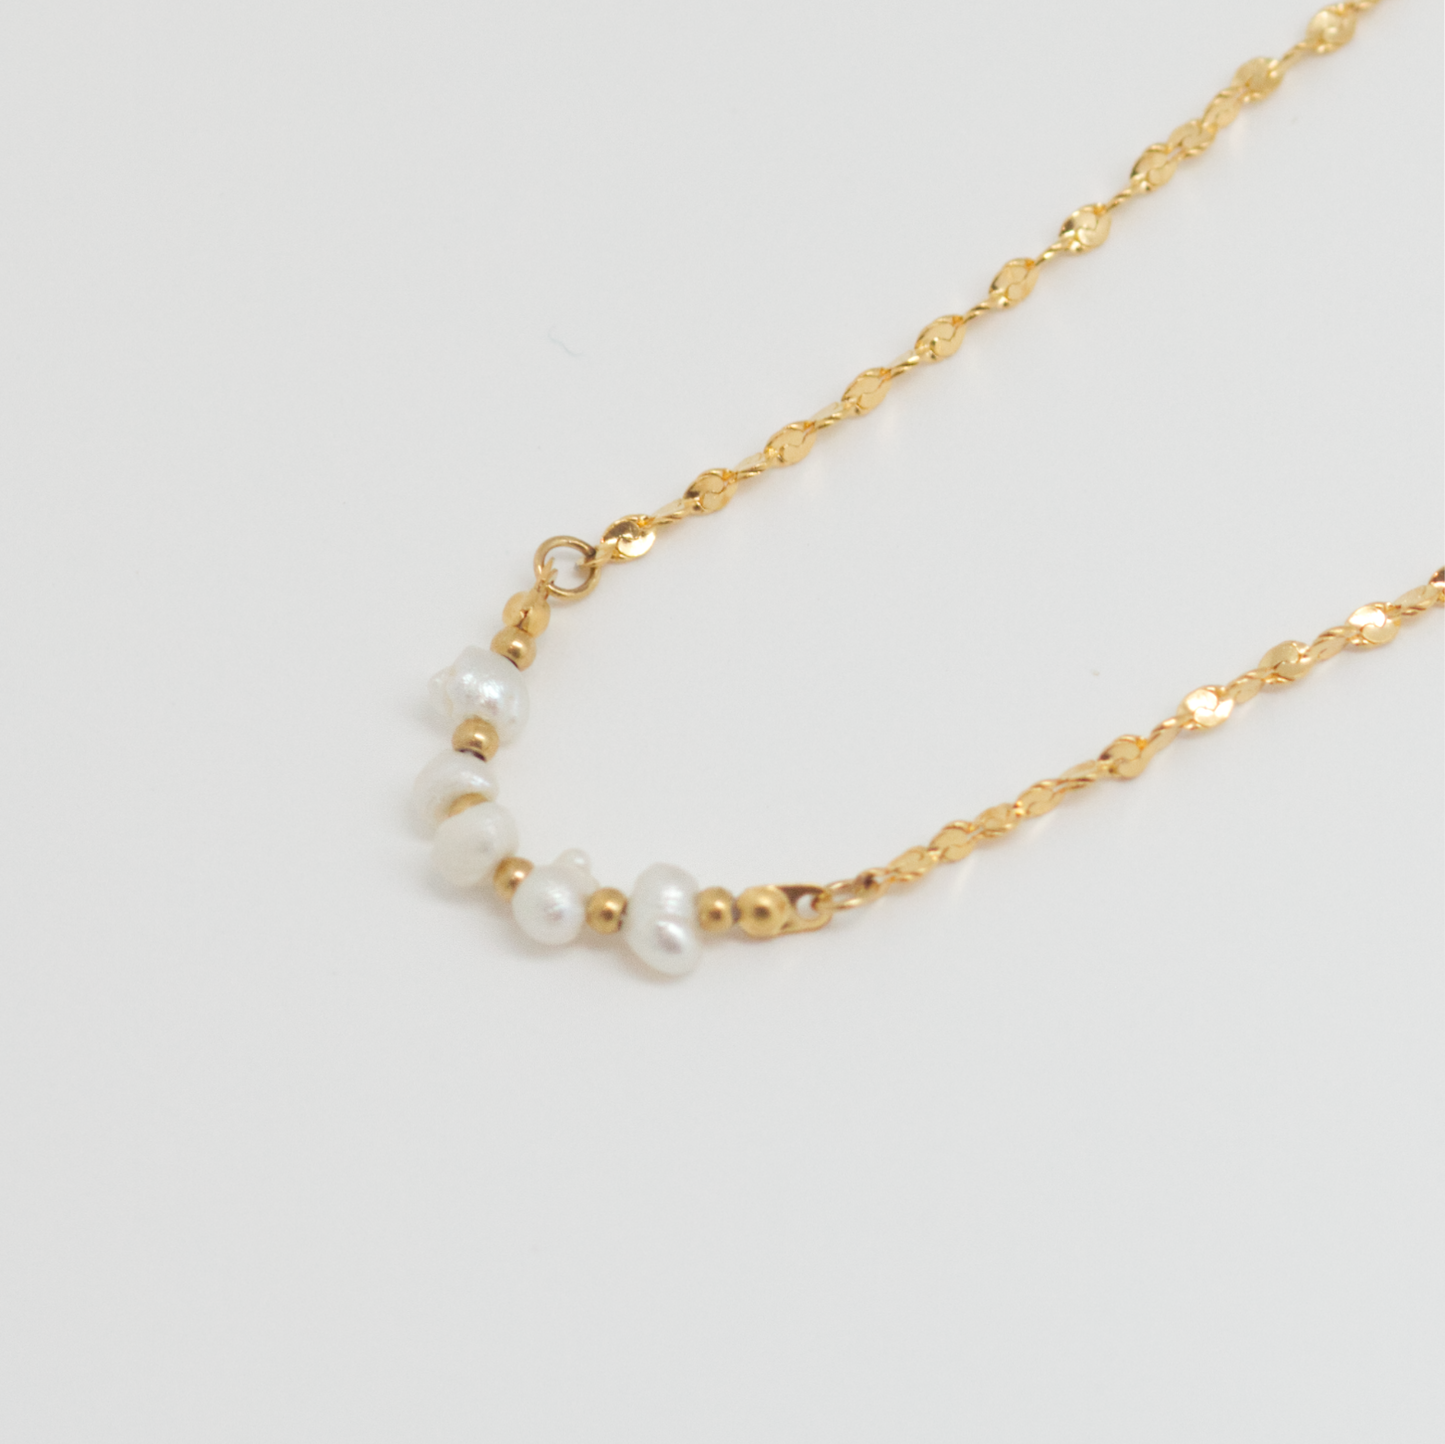 Salty Cali Pearl & Chain Necklace - Gold